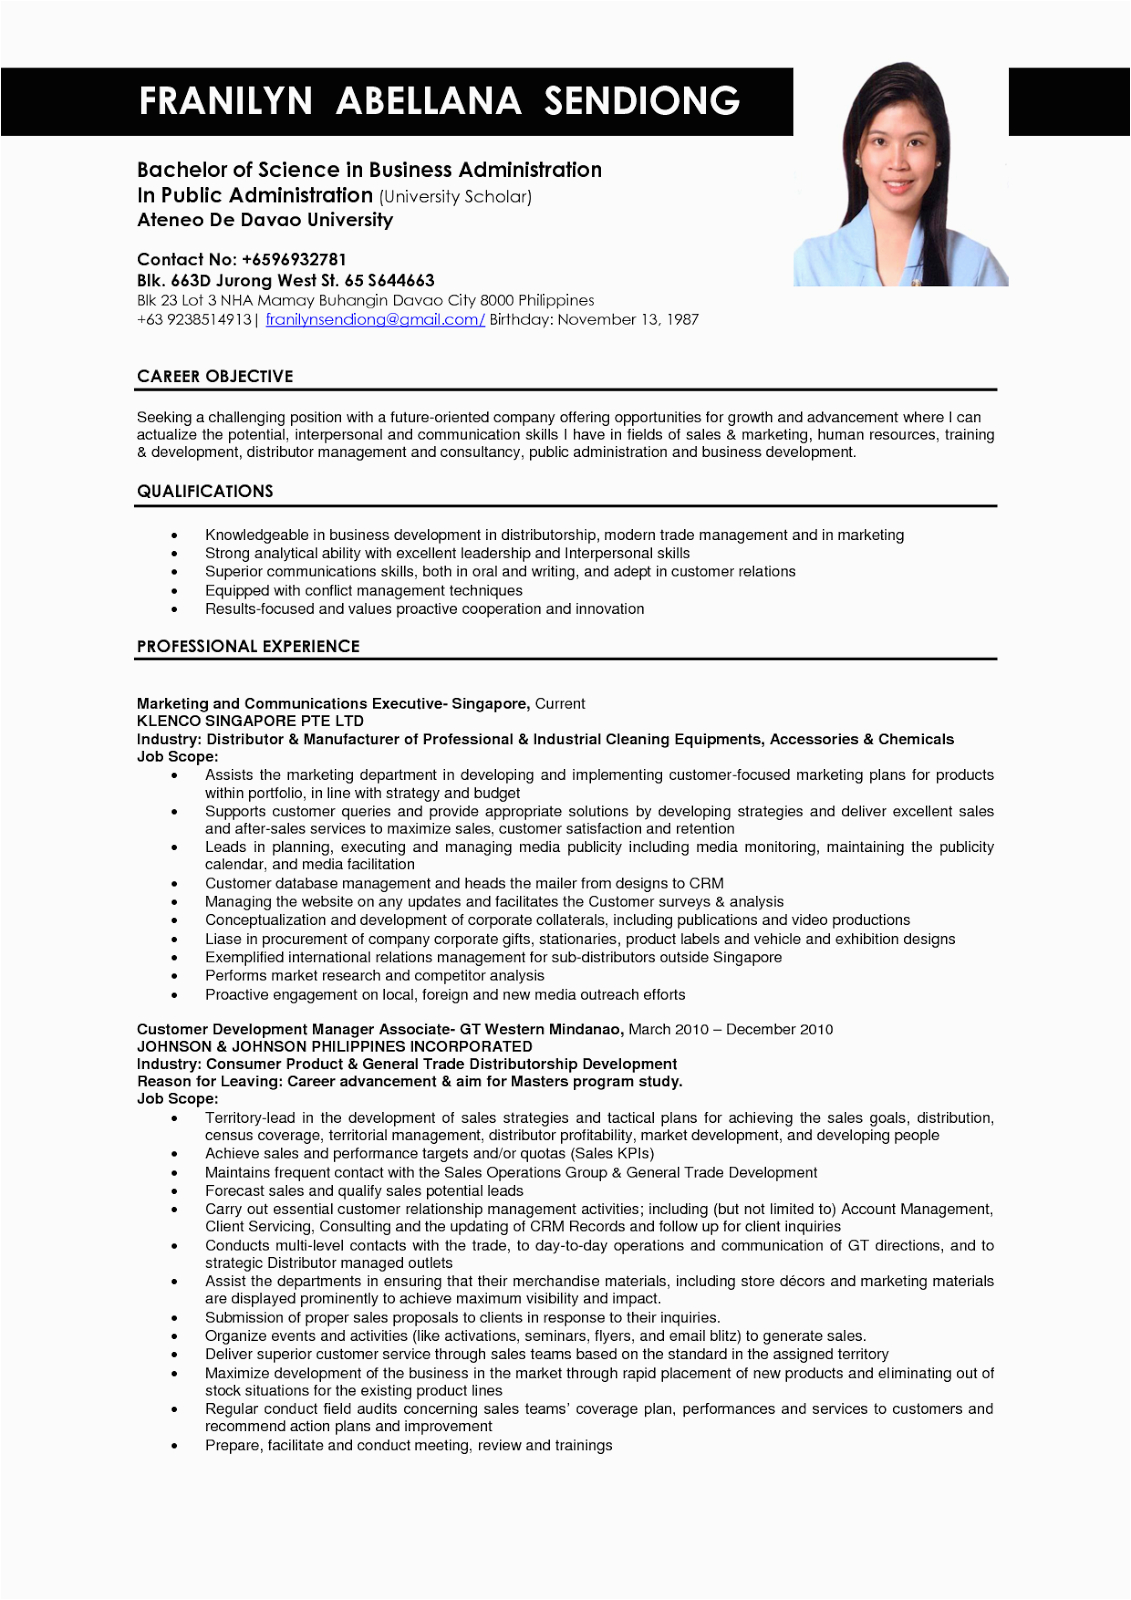 Sample Of Company Resume with Work Experience Business Administration Resume Samples